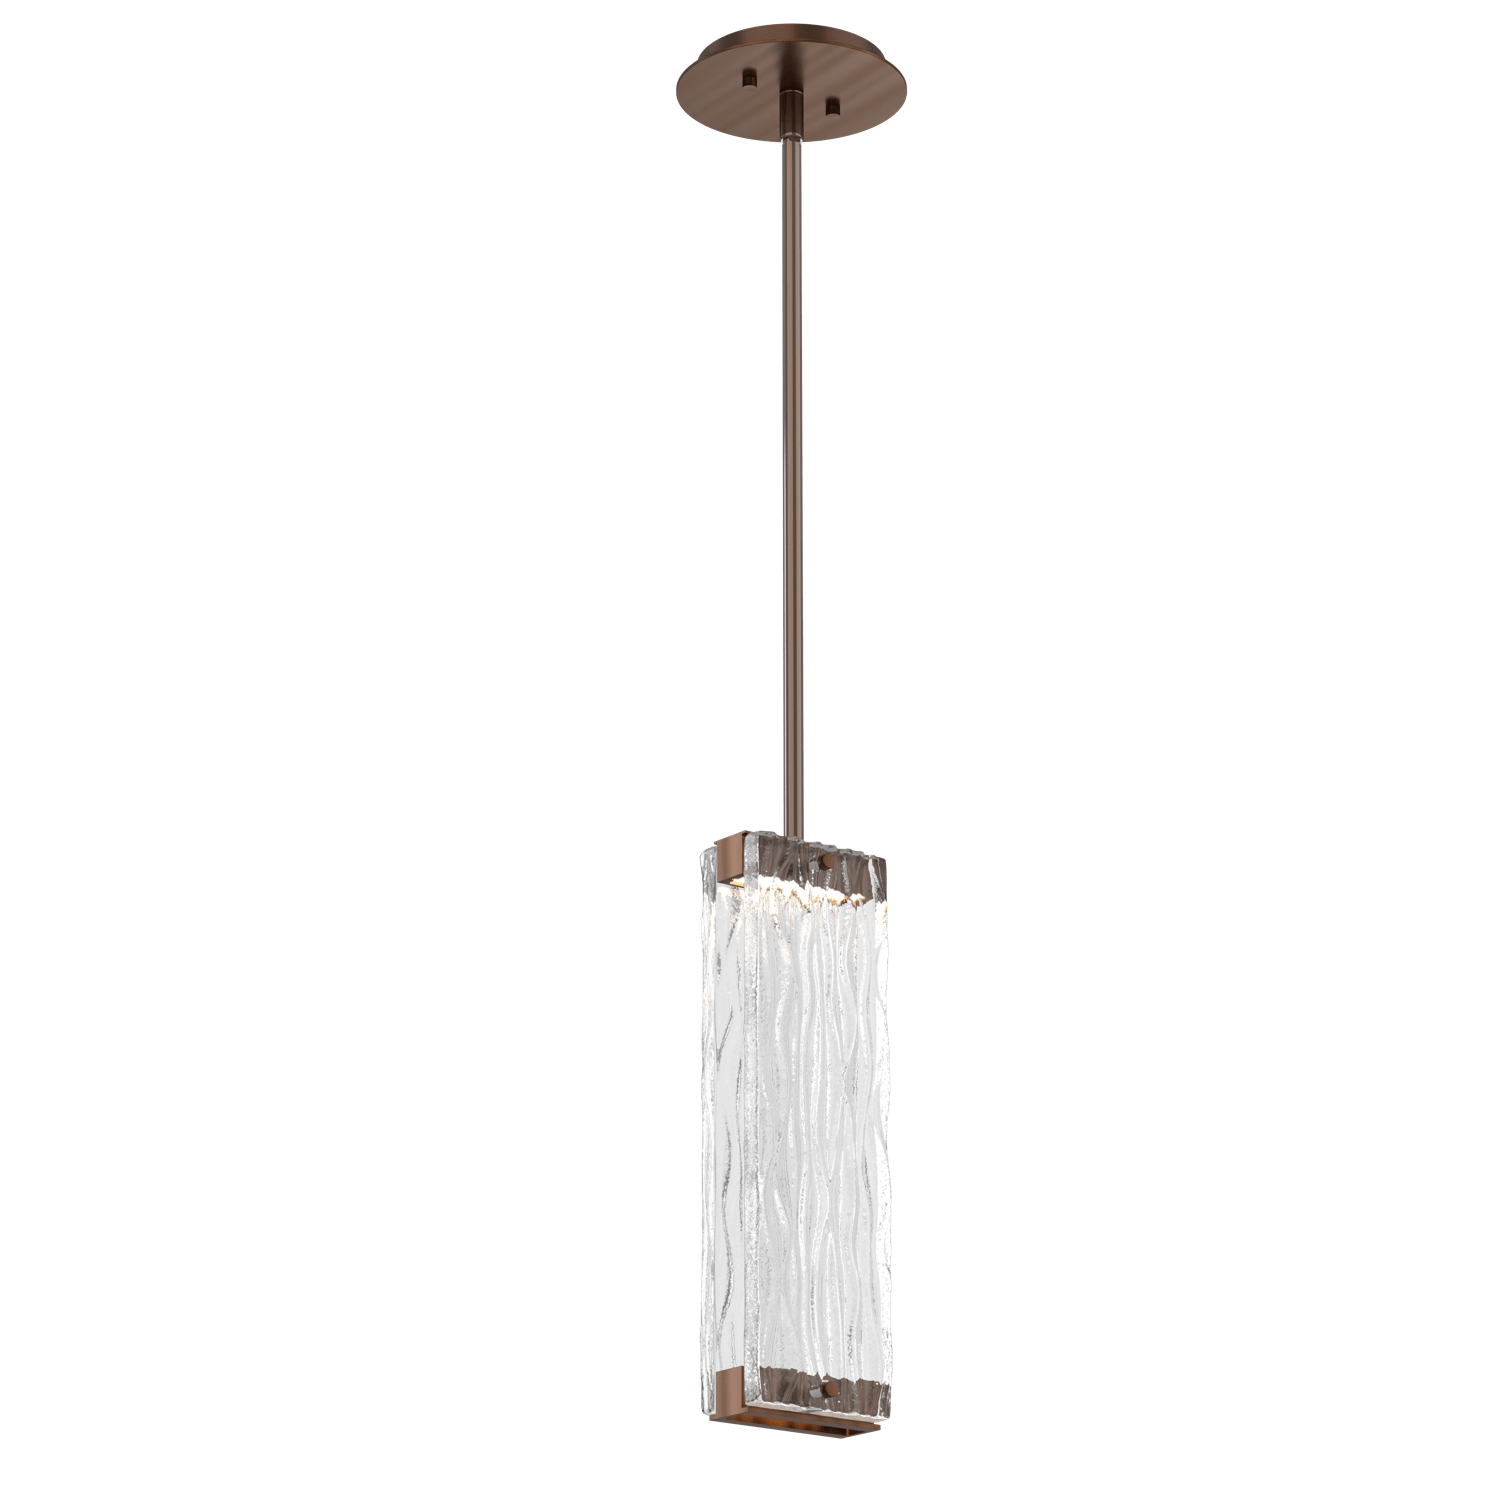 LAB0090-01-RB-TT-Hammerton-Studio-Tabulo-pendant-light-with-oil-rubbed-bronze-finish-and-clear-tidal-cast-glass-shade-and-LED-lamping